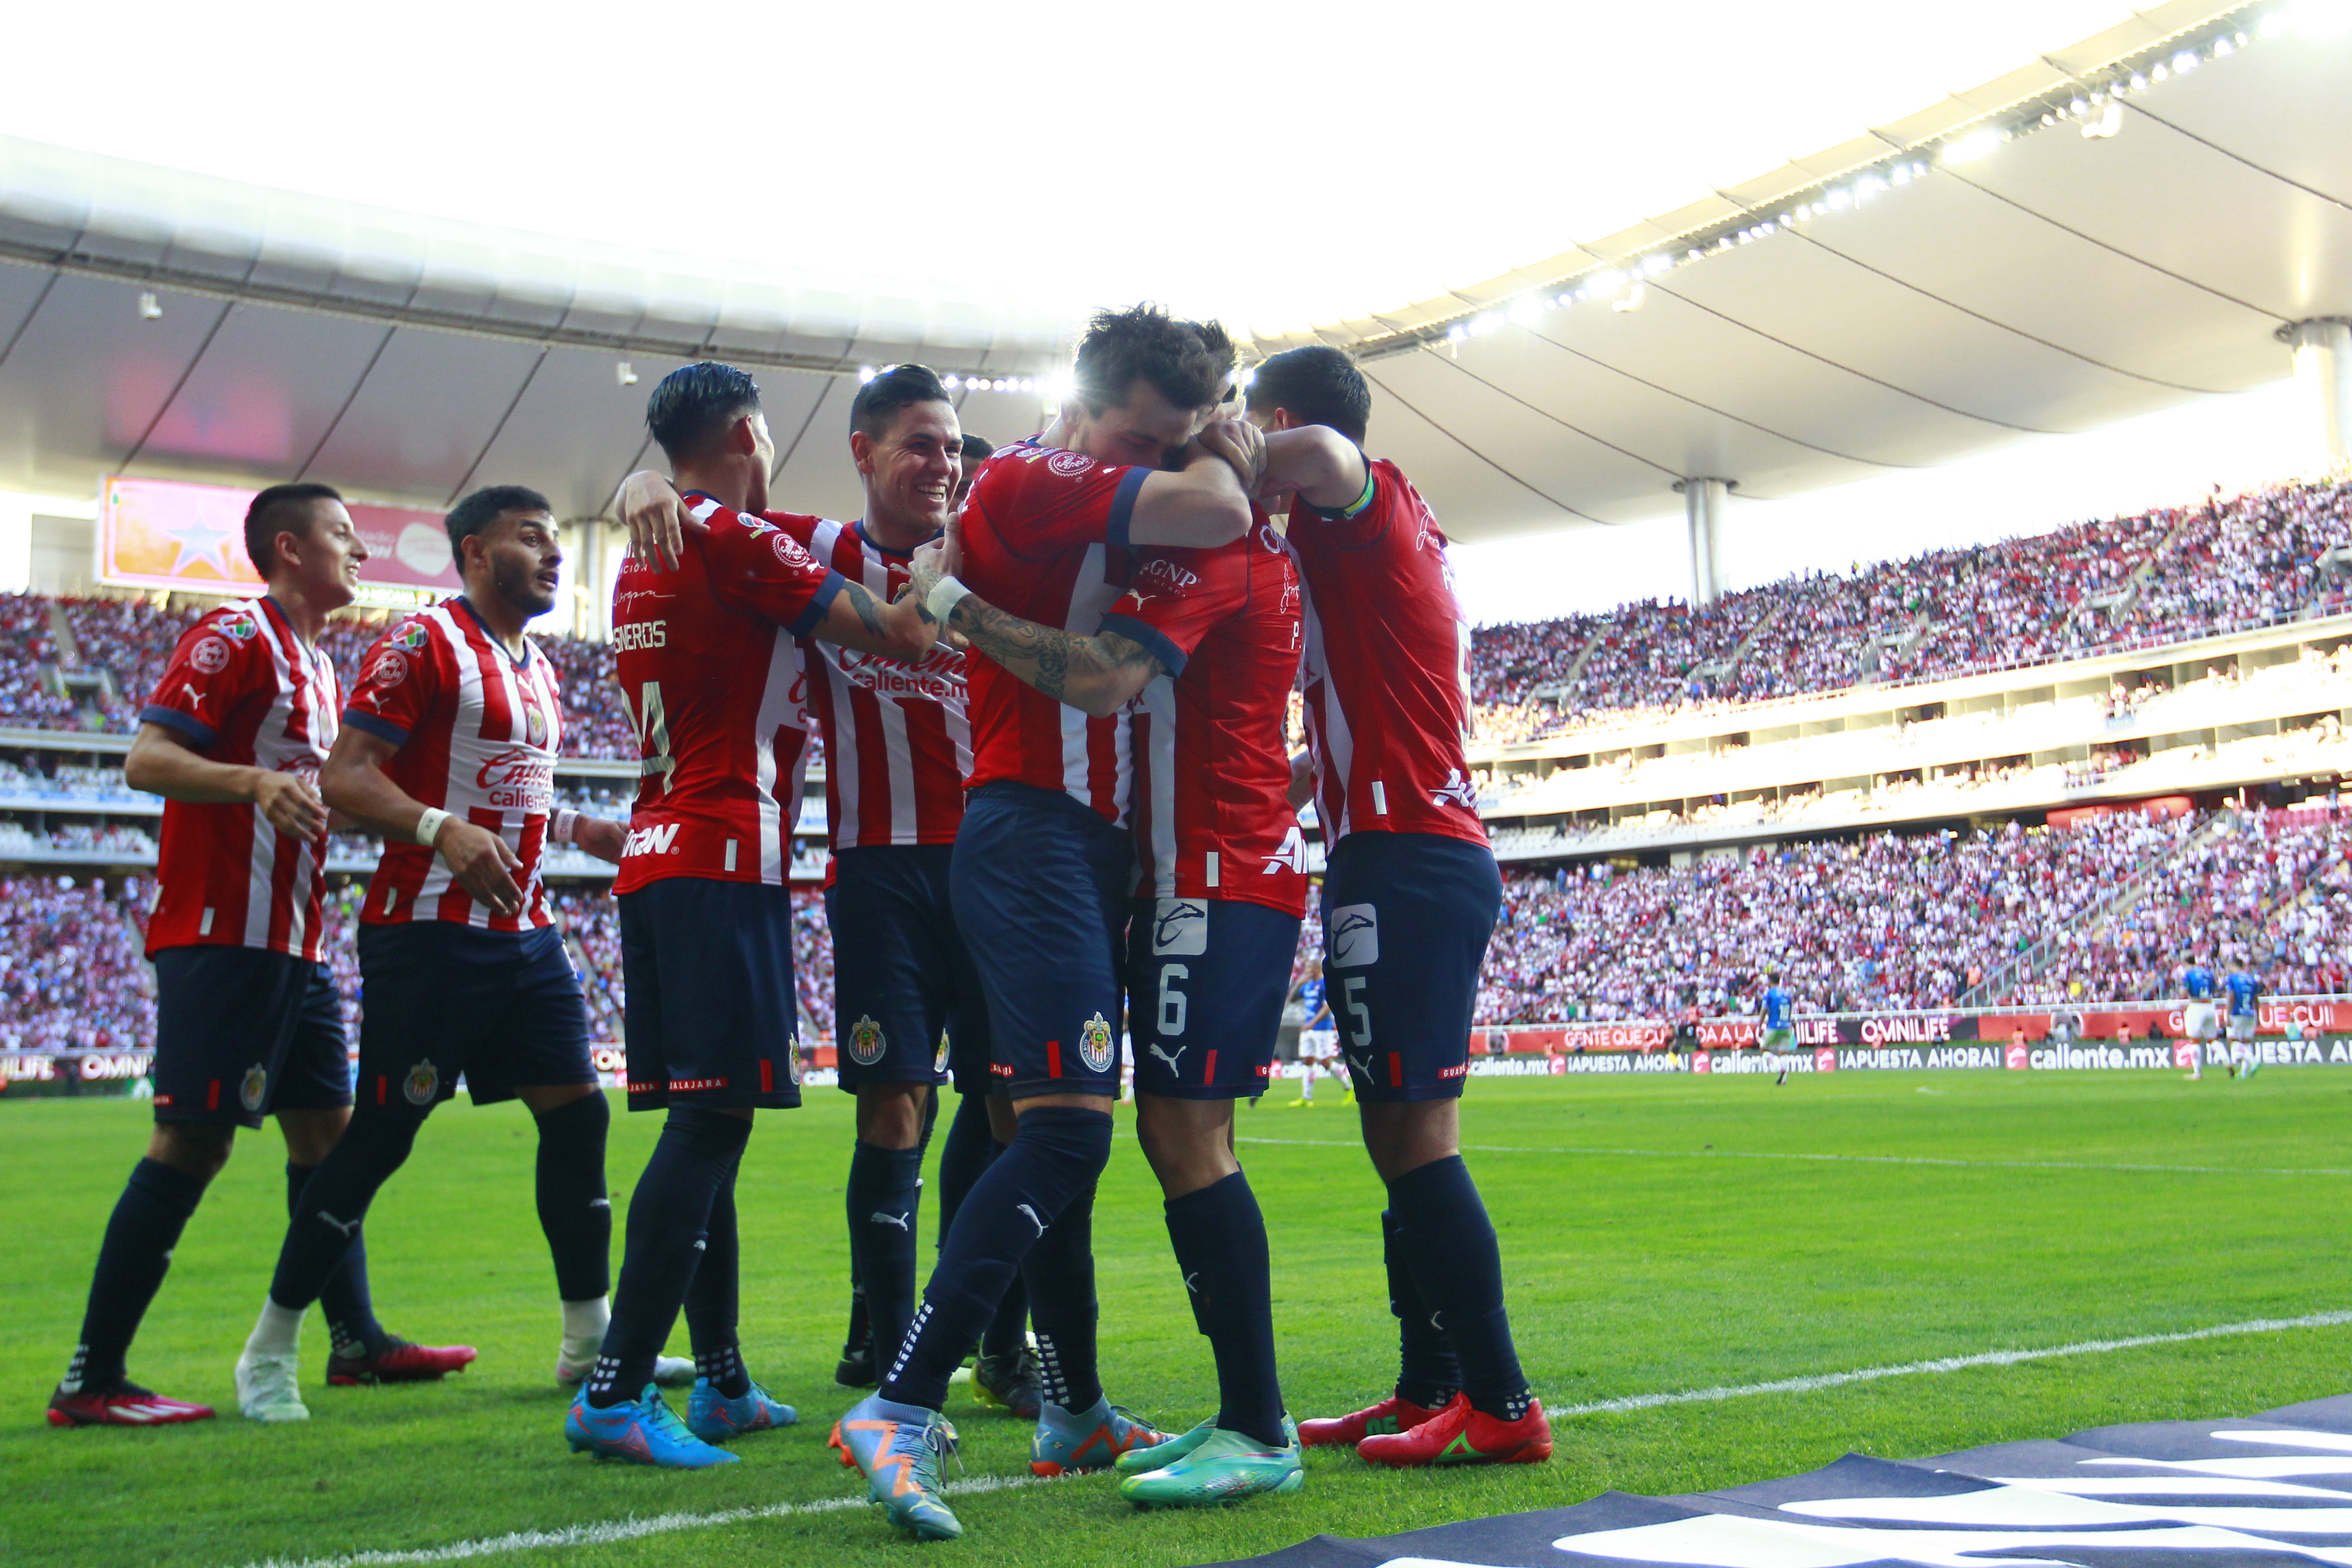 Chivas not slowing down as Paunovic's squad moves up in Liga MX standings